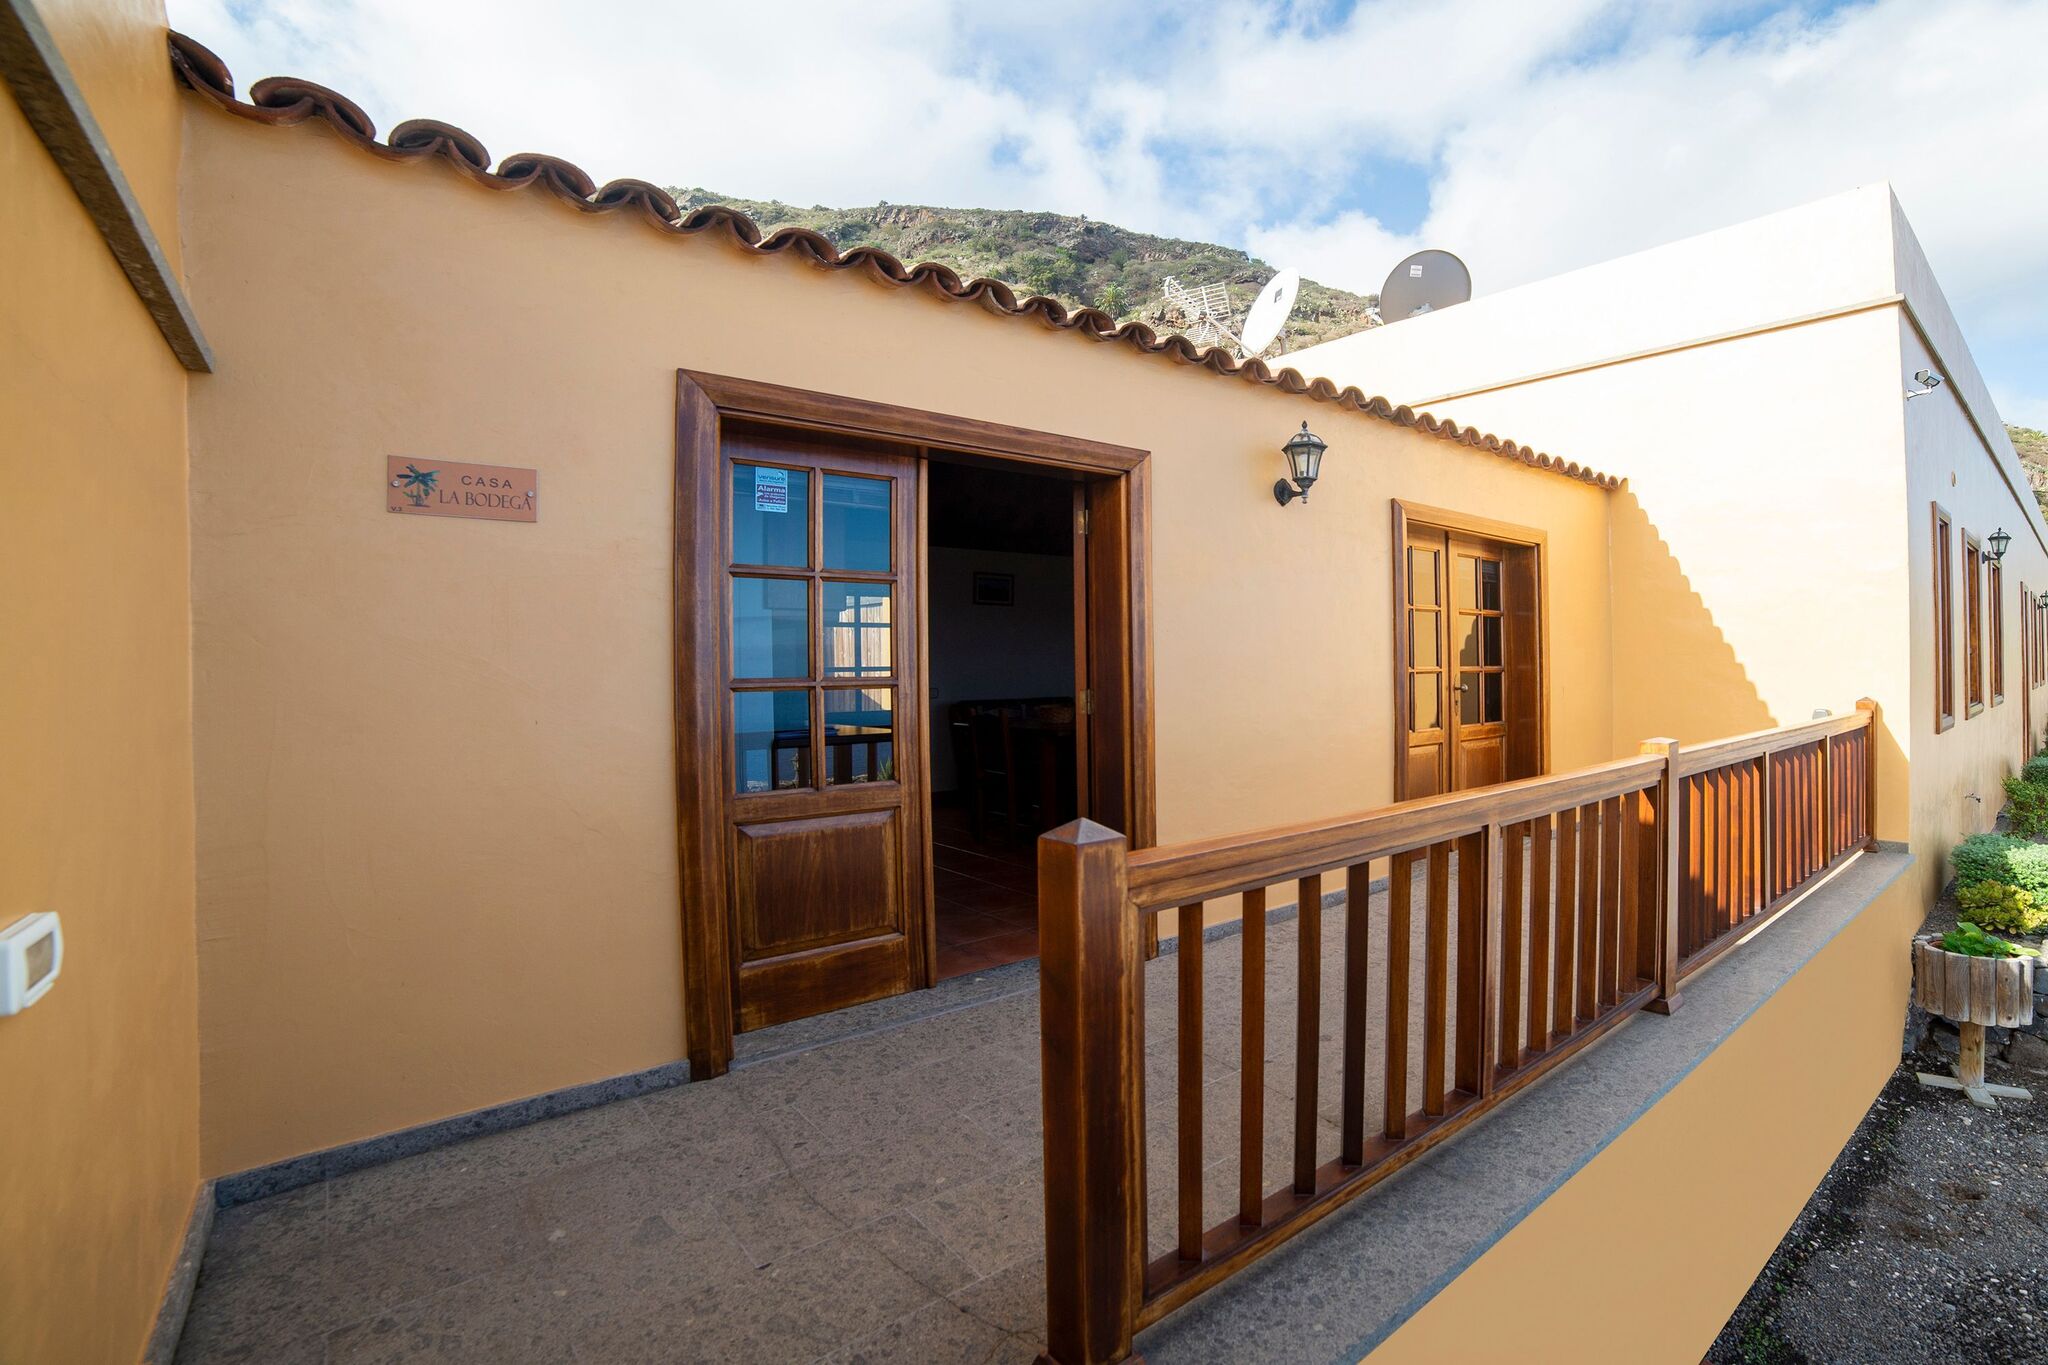 Nice apartment with fantastic views of the coastline of Tenerife